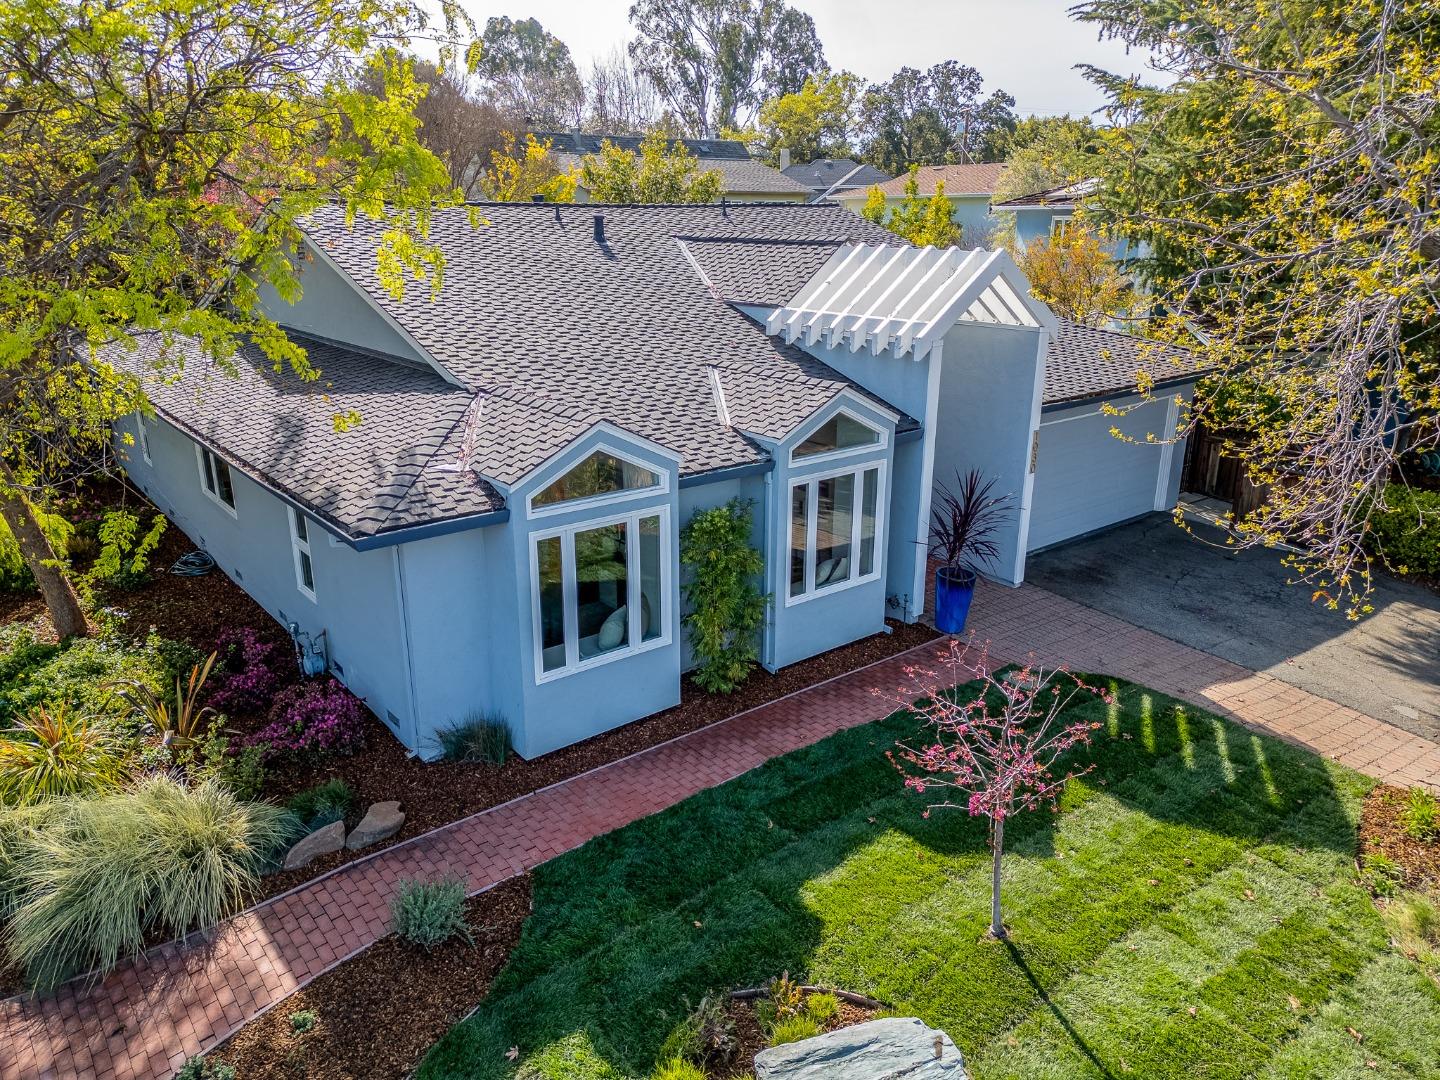 Photo of 1030 Paradise Wy in Palo Alto, CA